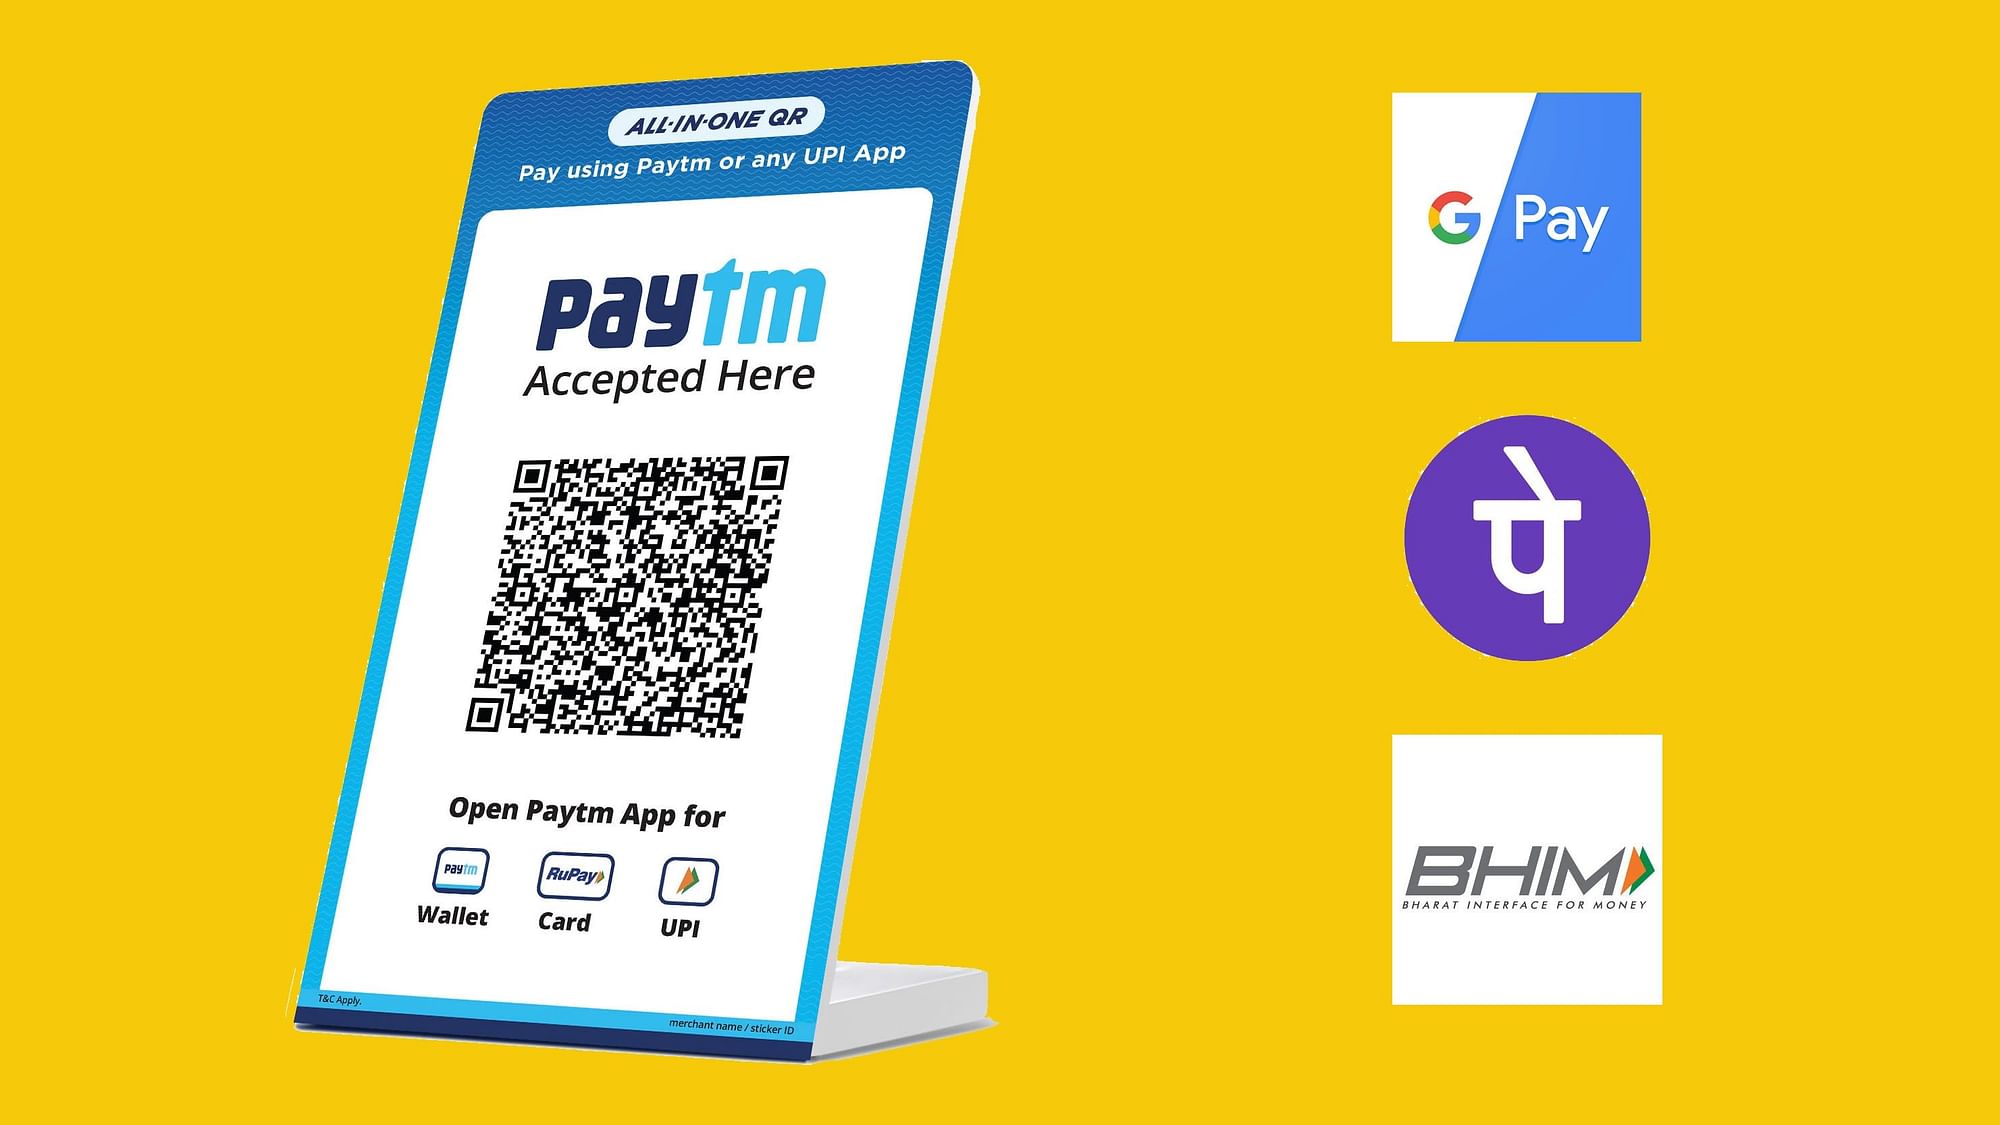 paytm-qr-code-upi-payments-at-indian-railways-steps-to-use